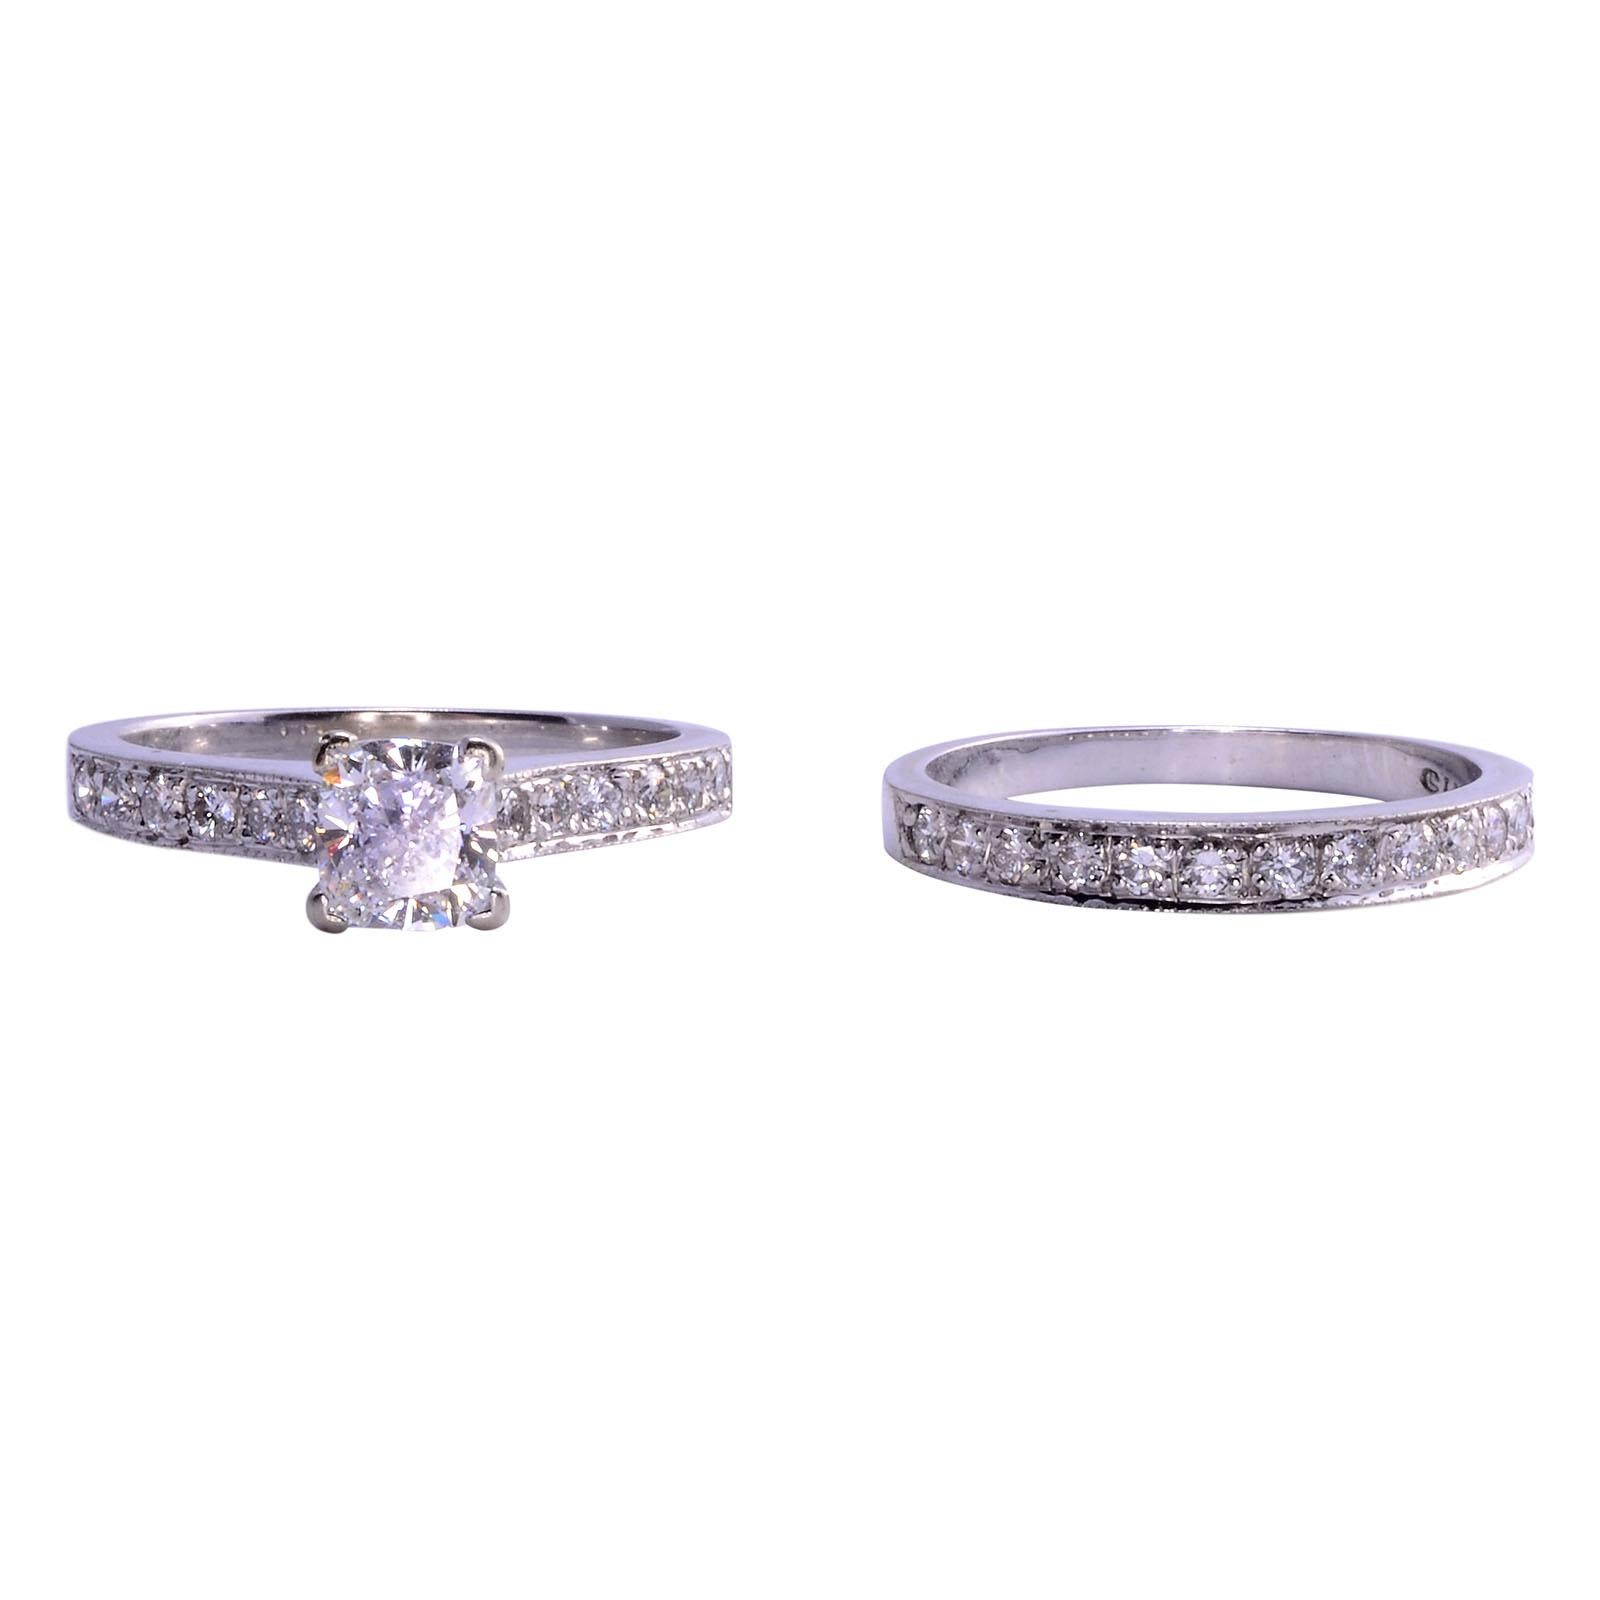 Estate 1.04 carat VS1 E center diamond wedding set. The 14 karat white gold engagement ring features a 1.04 carat center diamond having VS1 clarity and E color. The center diamond is accented with 12 round brilliant diamonds on the band of the